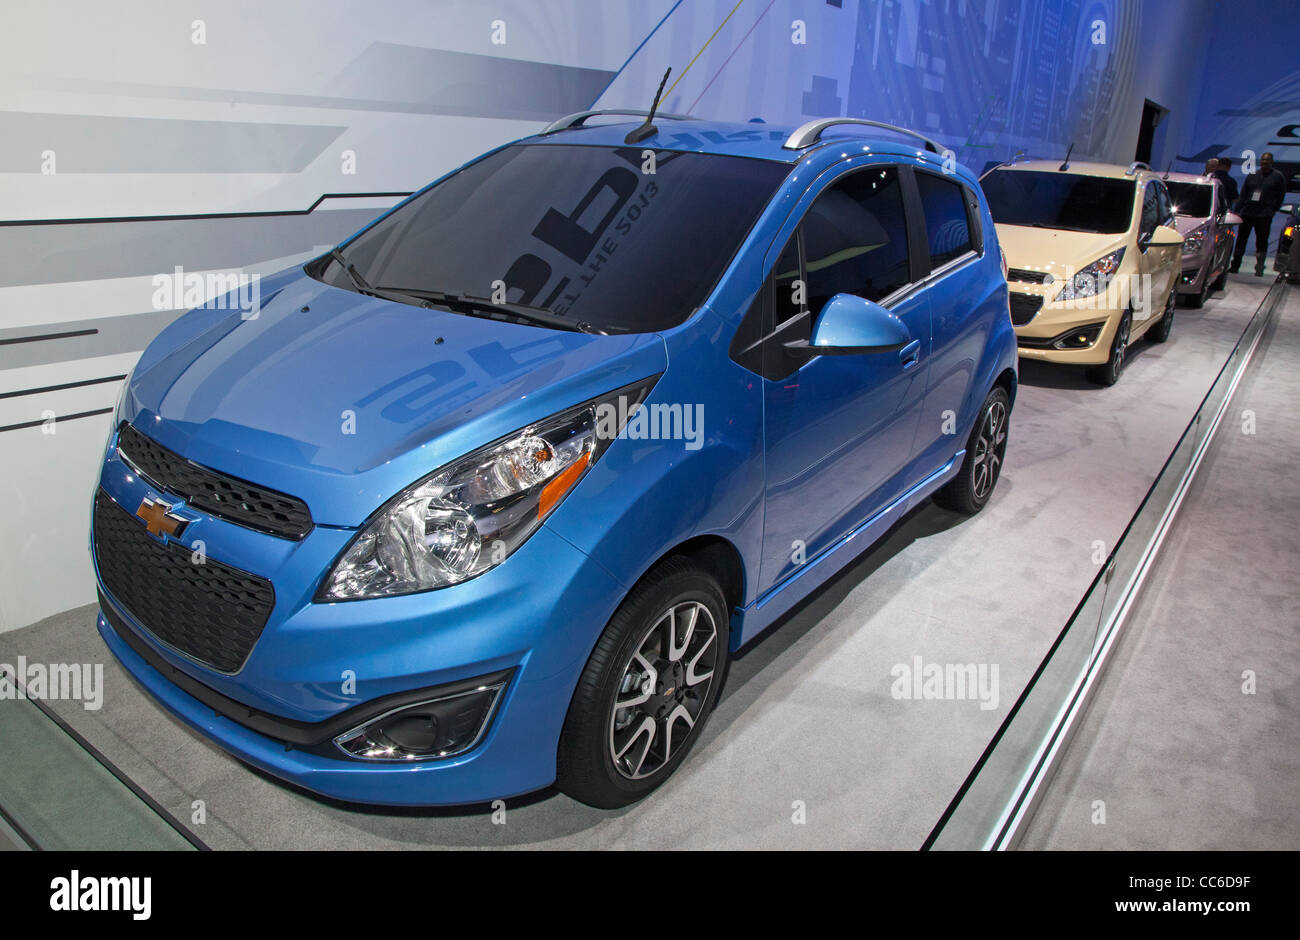 Detroit, Michigan - The 2013 Chevrolet Spark on display at the North American International Auto Show. Stock Photo